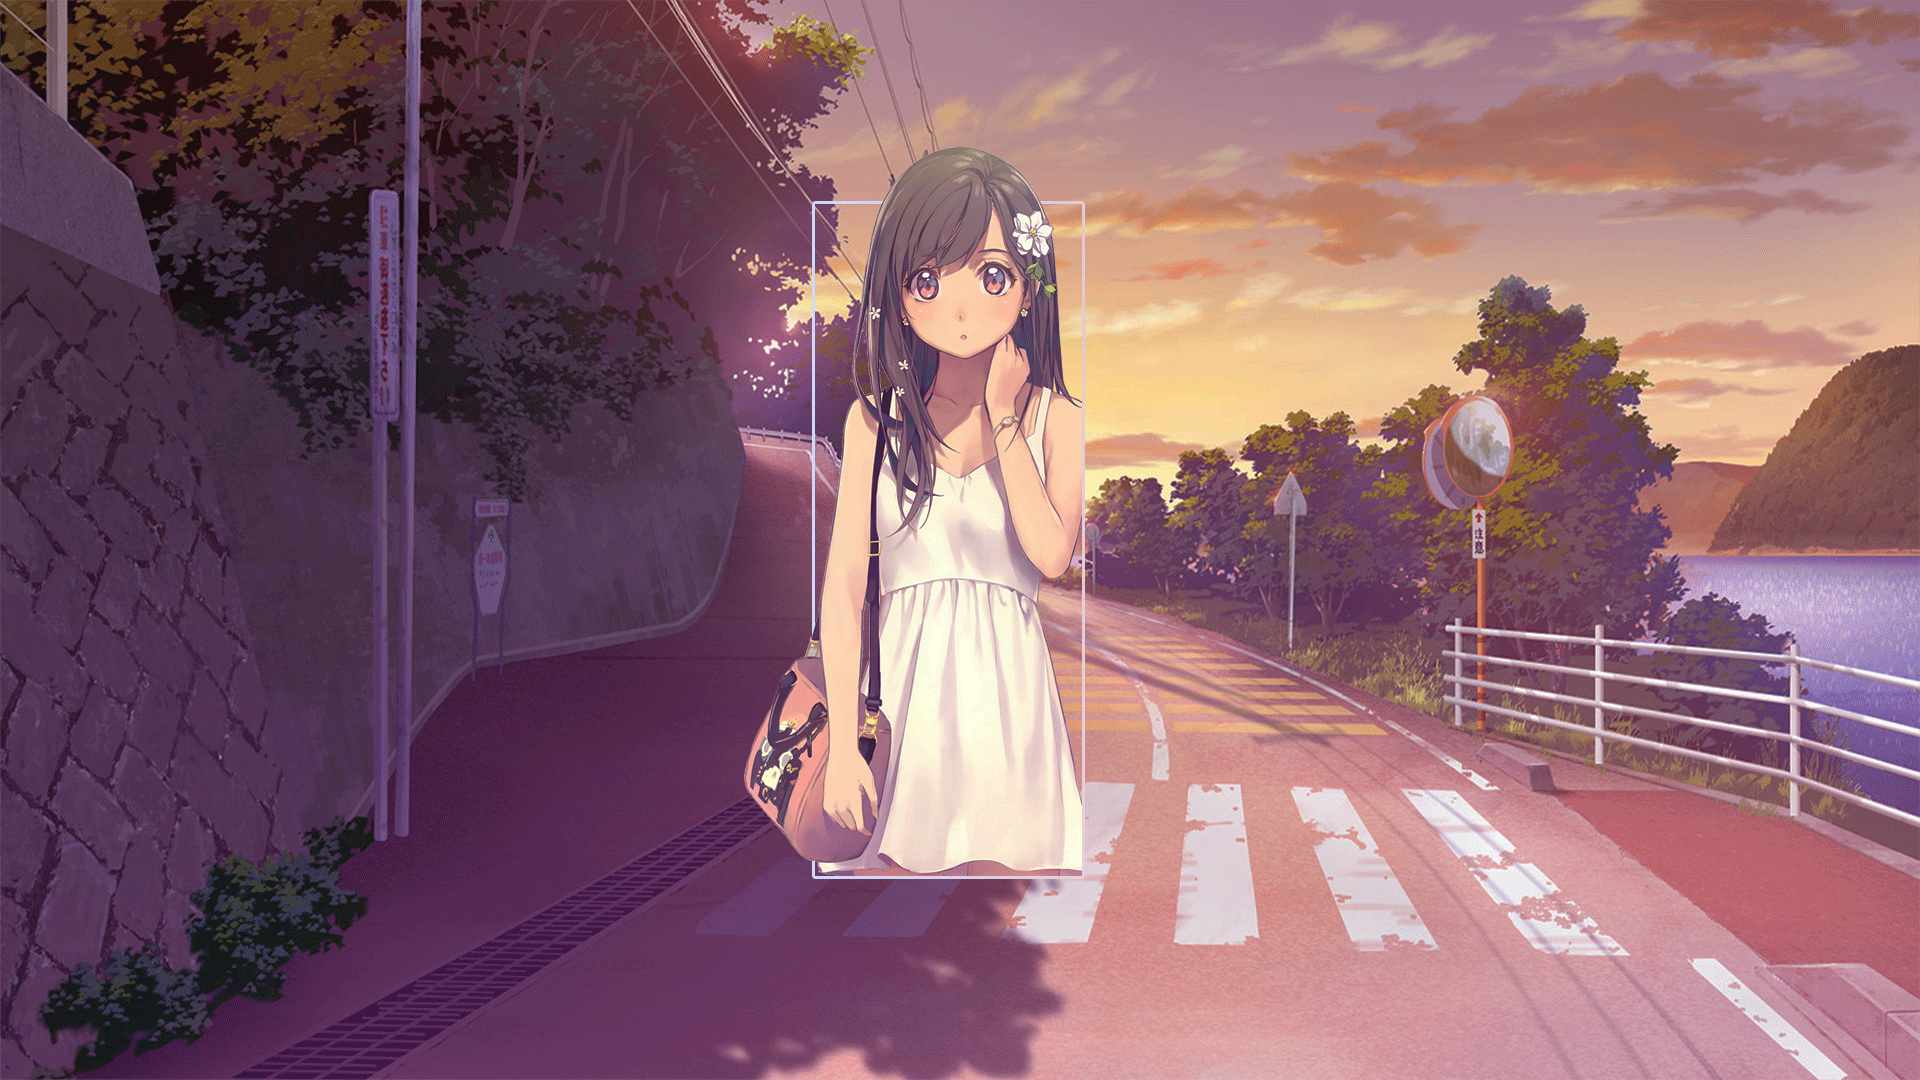 Wallpaper, anime girls, street, afternoon, road, Photohop, digital art, picture in picture, anime landscape, trees, picture, piture in picture 1920x1080